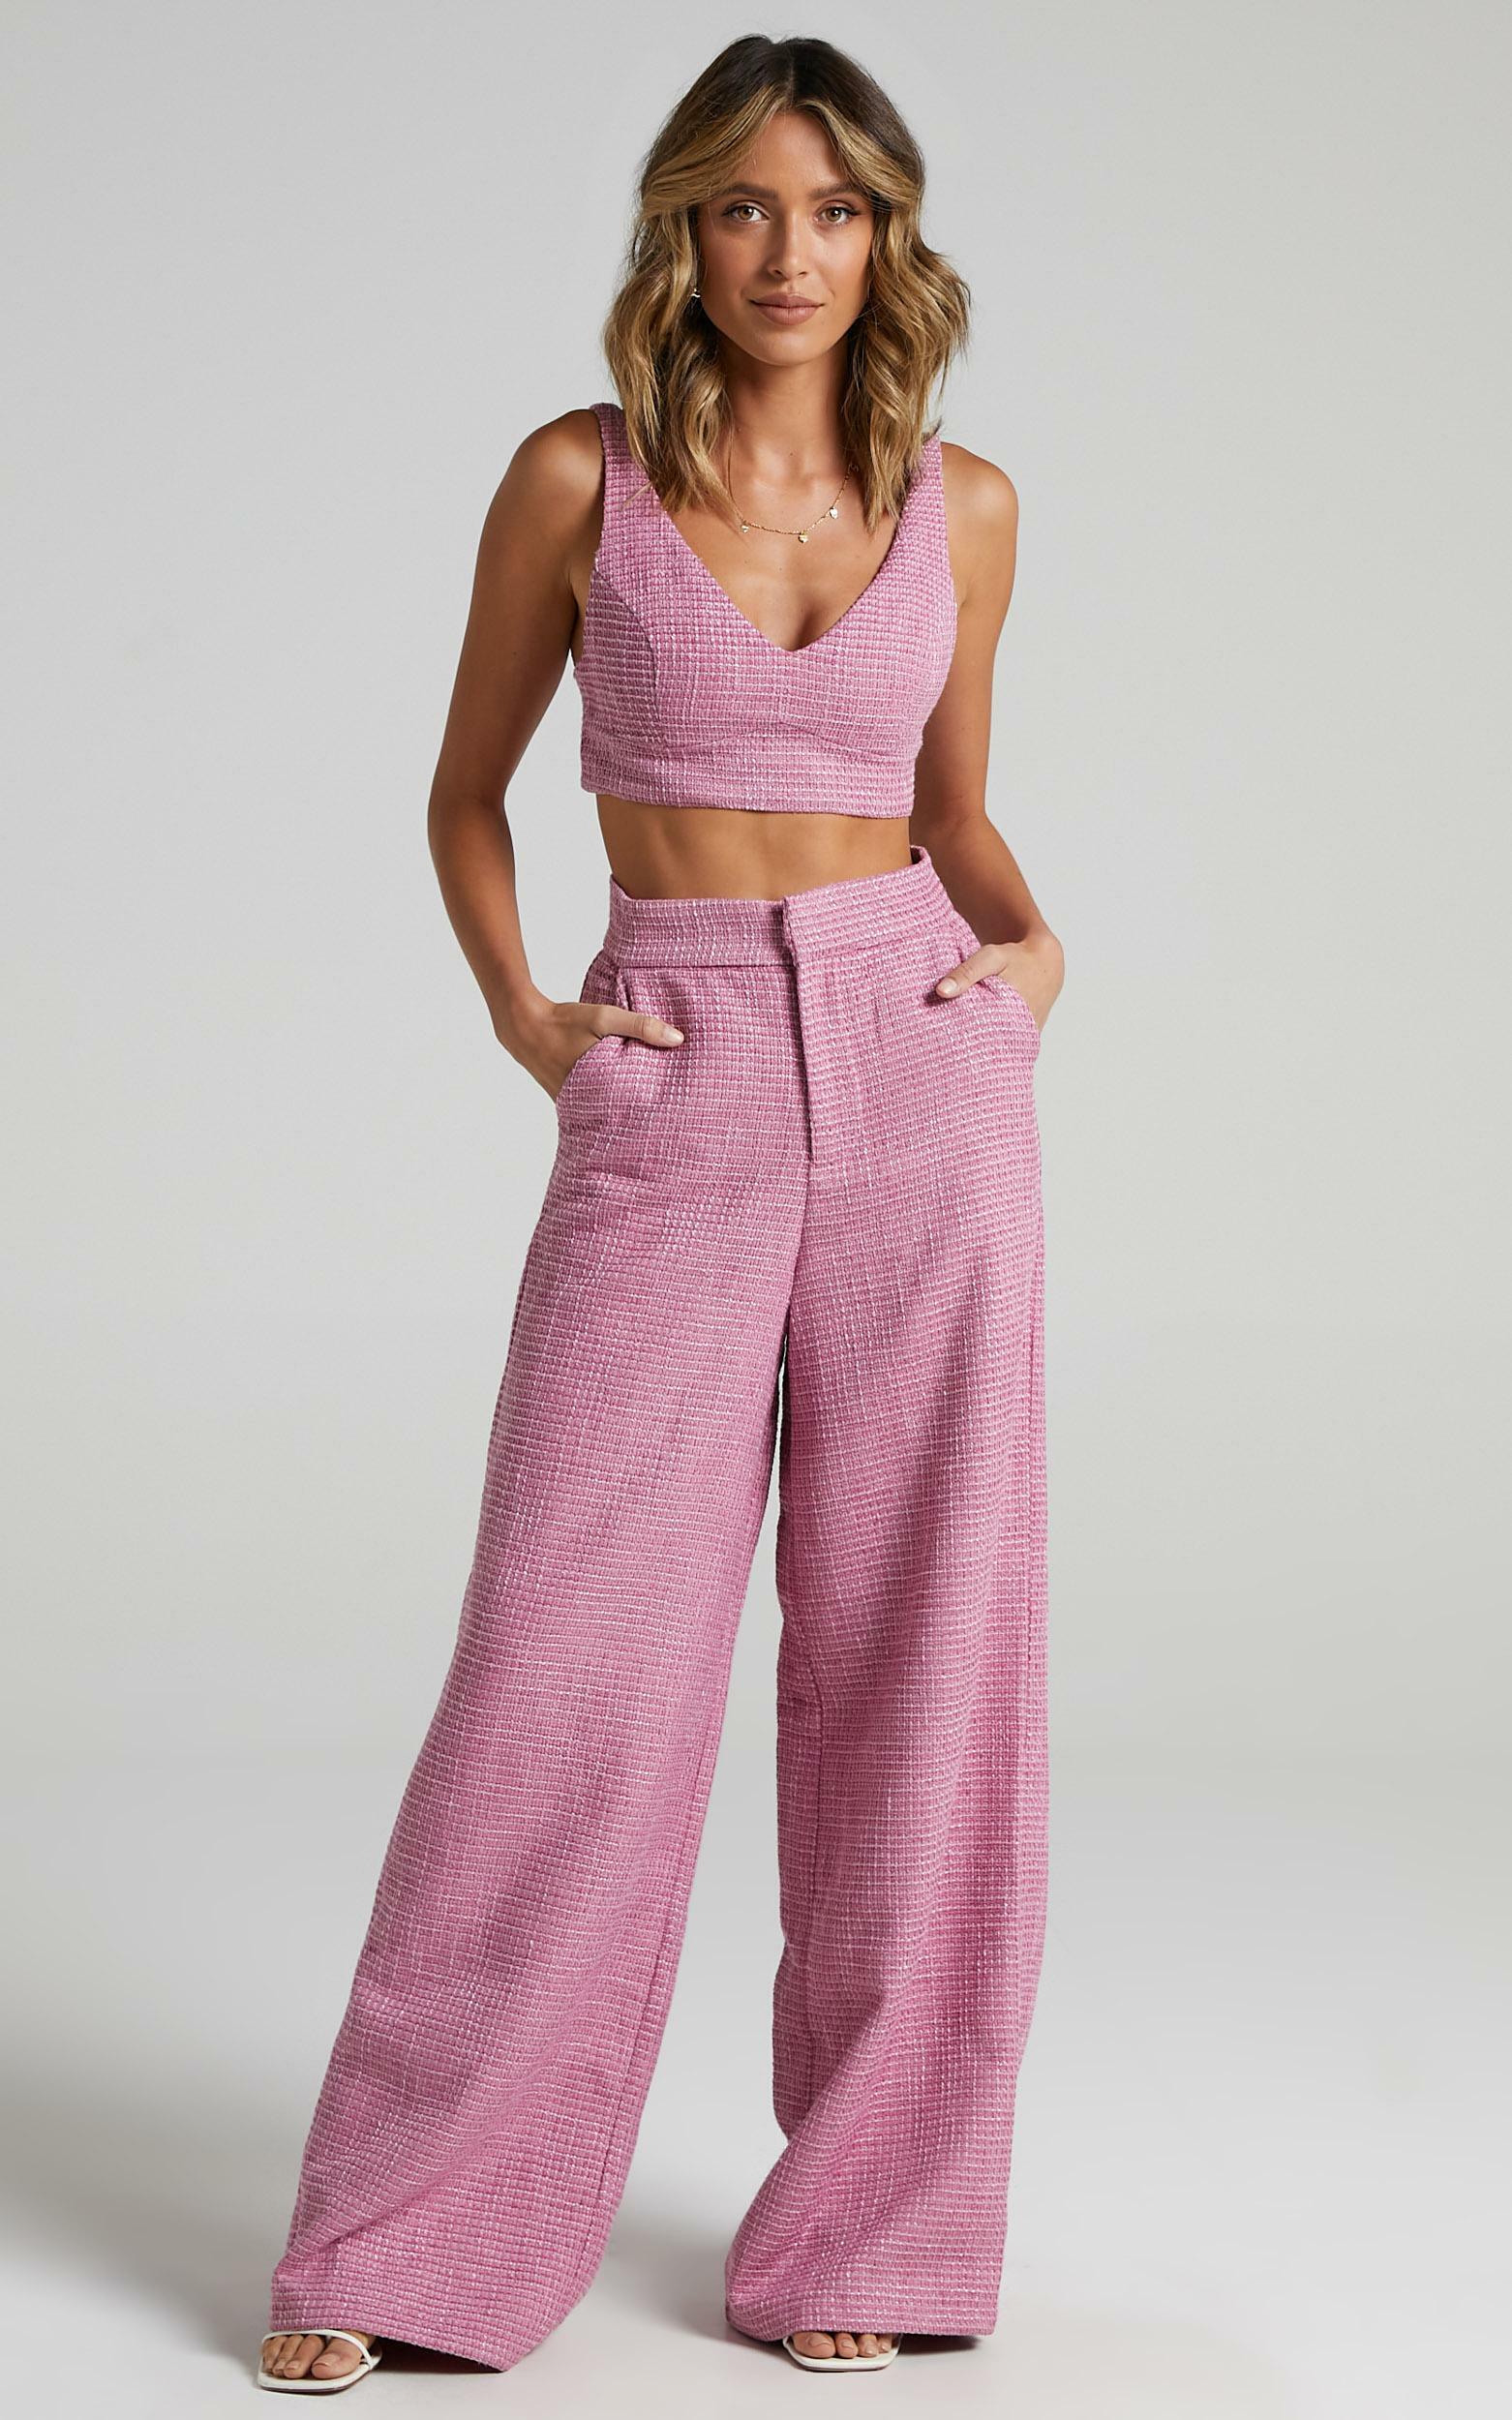 adelaide-two-piece-set-in-pink